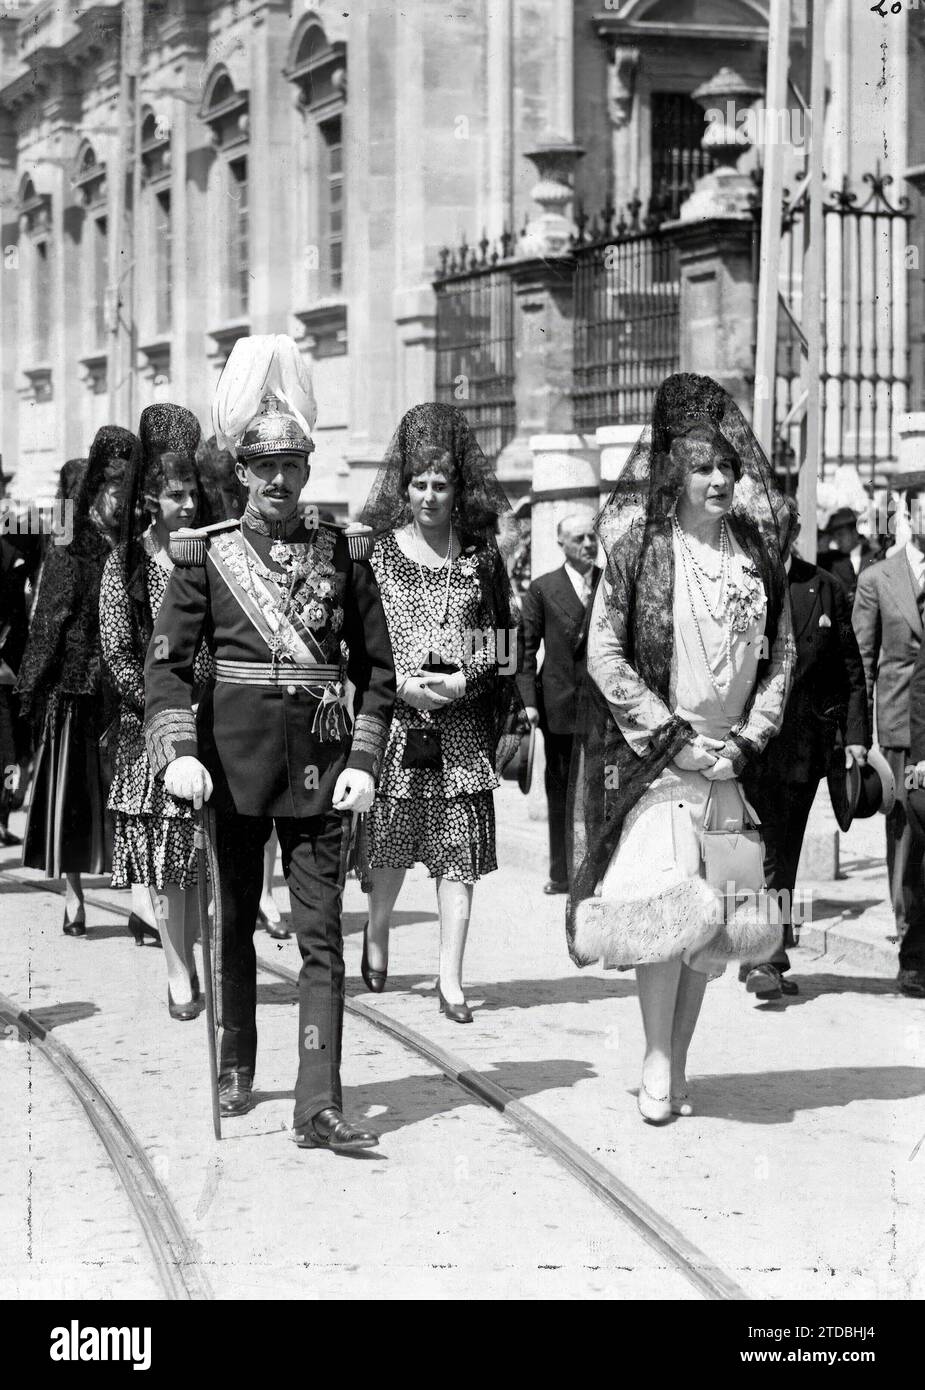 Ss.Mm. The Kings, with the Infantas Doña Beatriz and Doña Cristina, tour the streets of Seville on foot, during their visit to the Tabernacles during Holy Week in 1927, upon leaving the Cathedral. Photo: Fernandez -. Credit: Album / Archivo ABC / Fernández Stock Photo